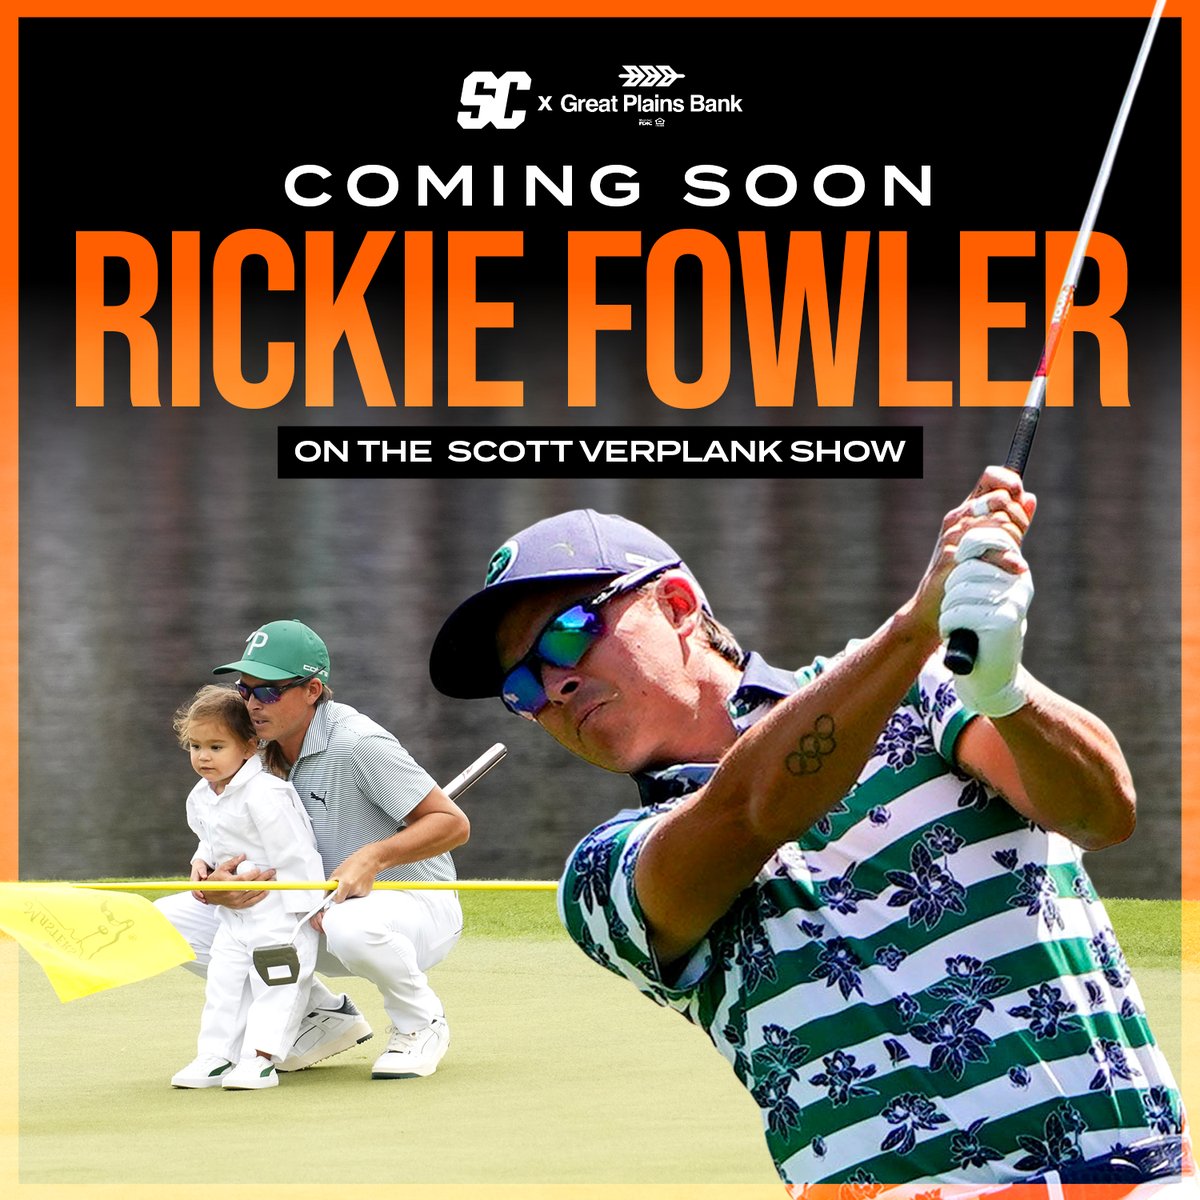 Coming soon to The Scott Verplank Show. 👀🍊⛳ @scottverplank @RickieFowler 

Presented by @GreatPlainsBank